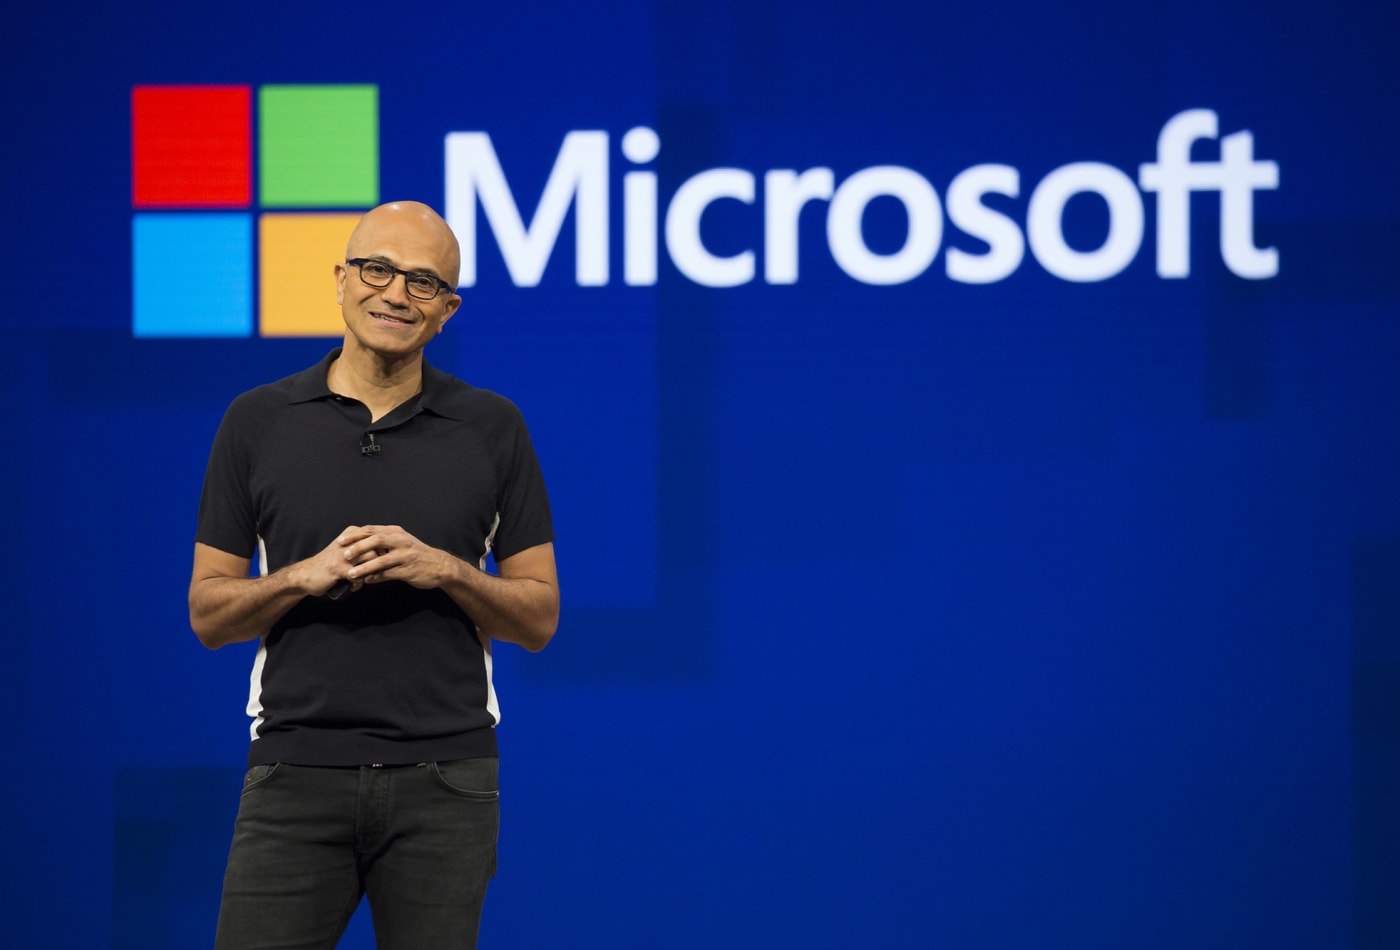 No place for hate, racism in society: Satya Nadella